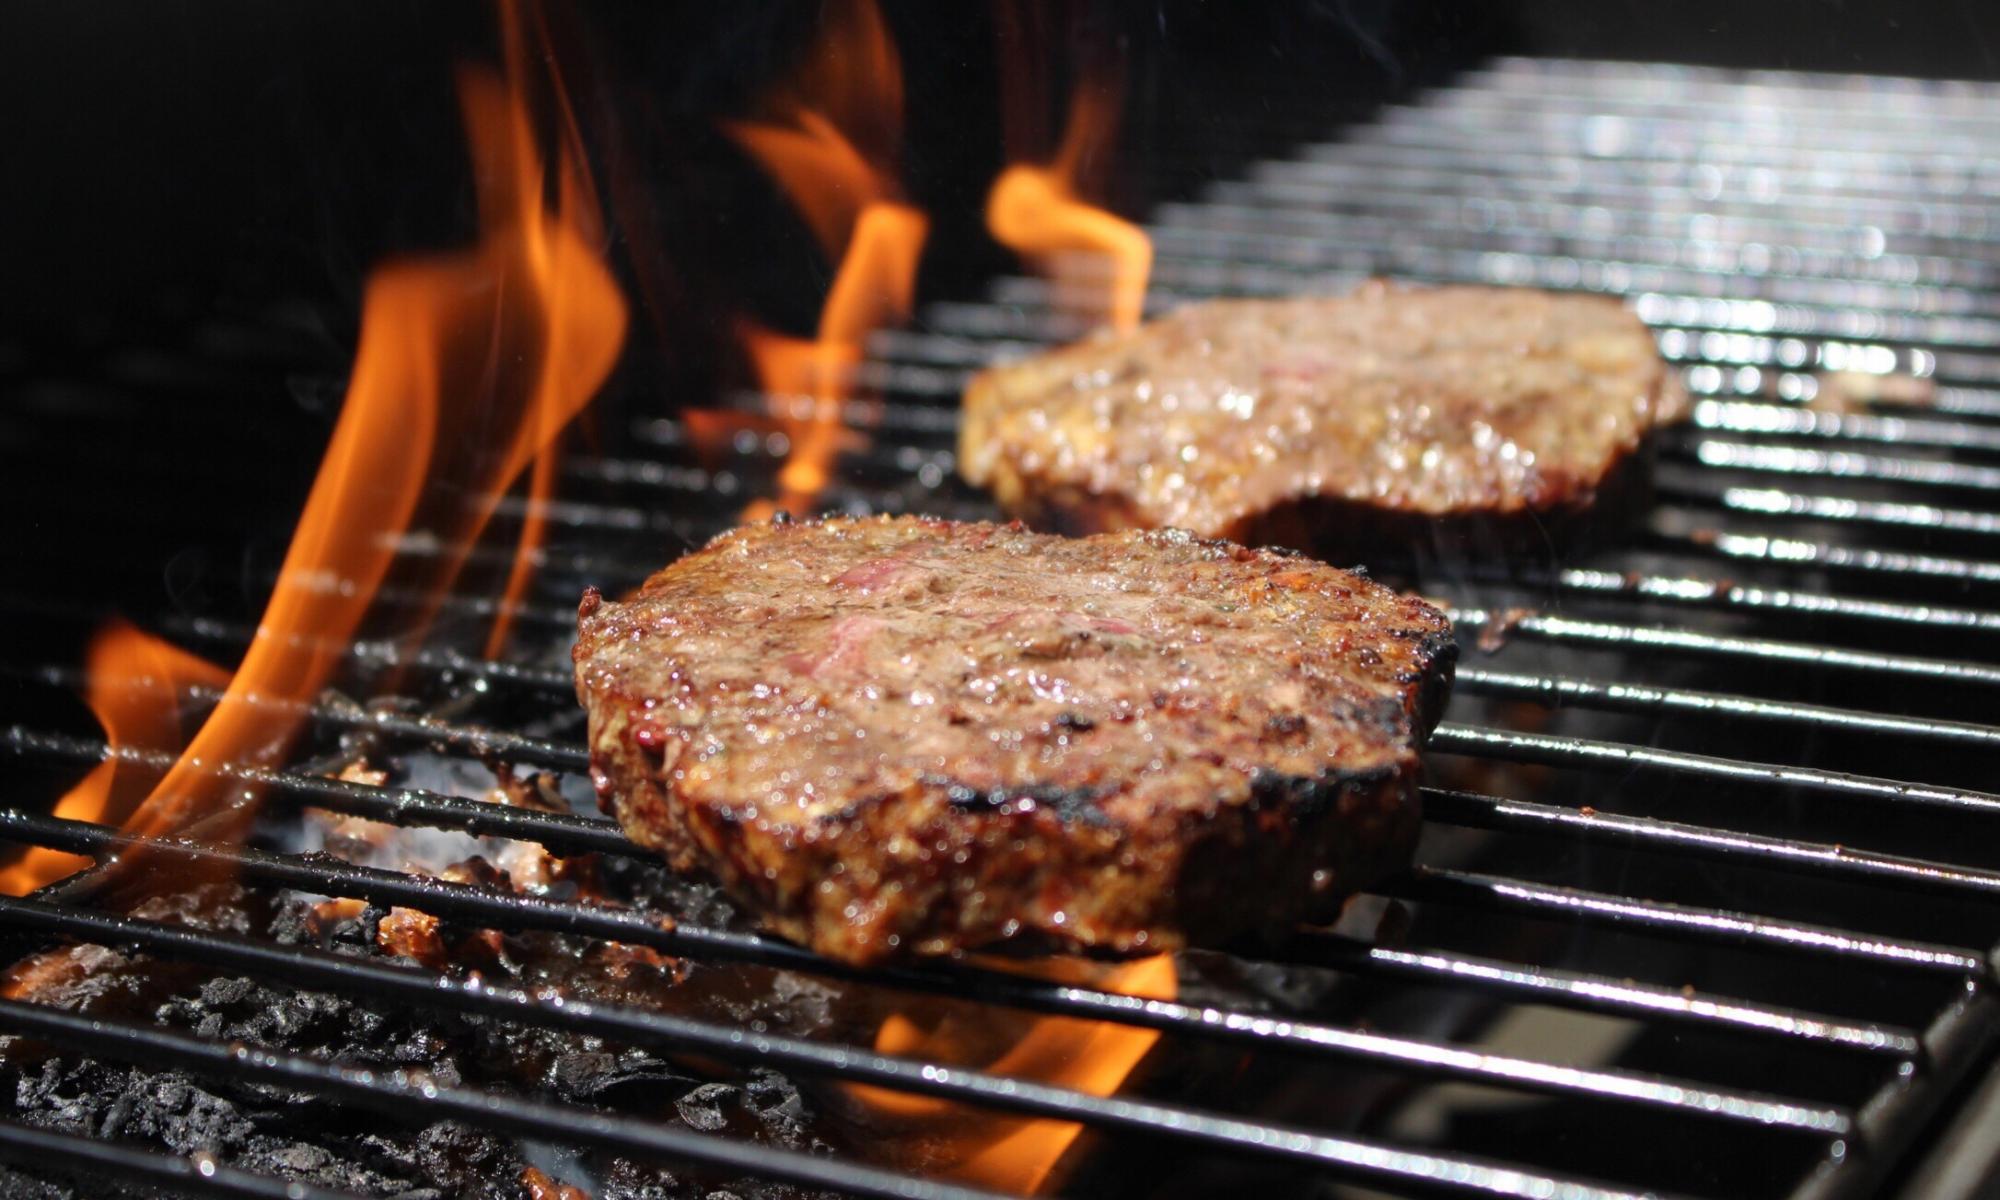 Cut meat consumption to two burgers a week to save planet, study suggests